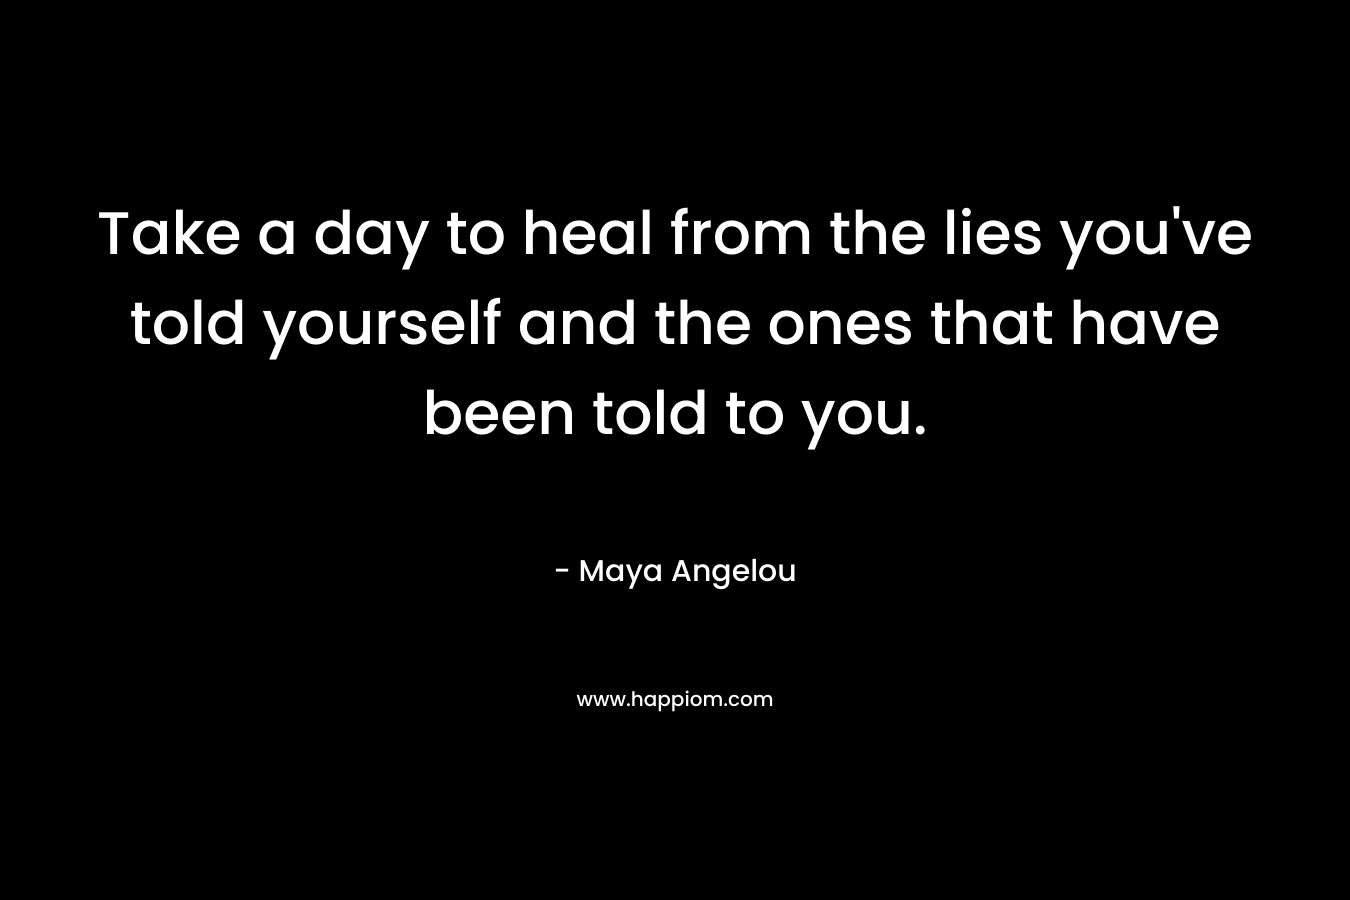 Take a day to heal from the lies you've told yourself and the ones that have been told to you.